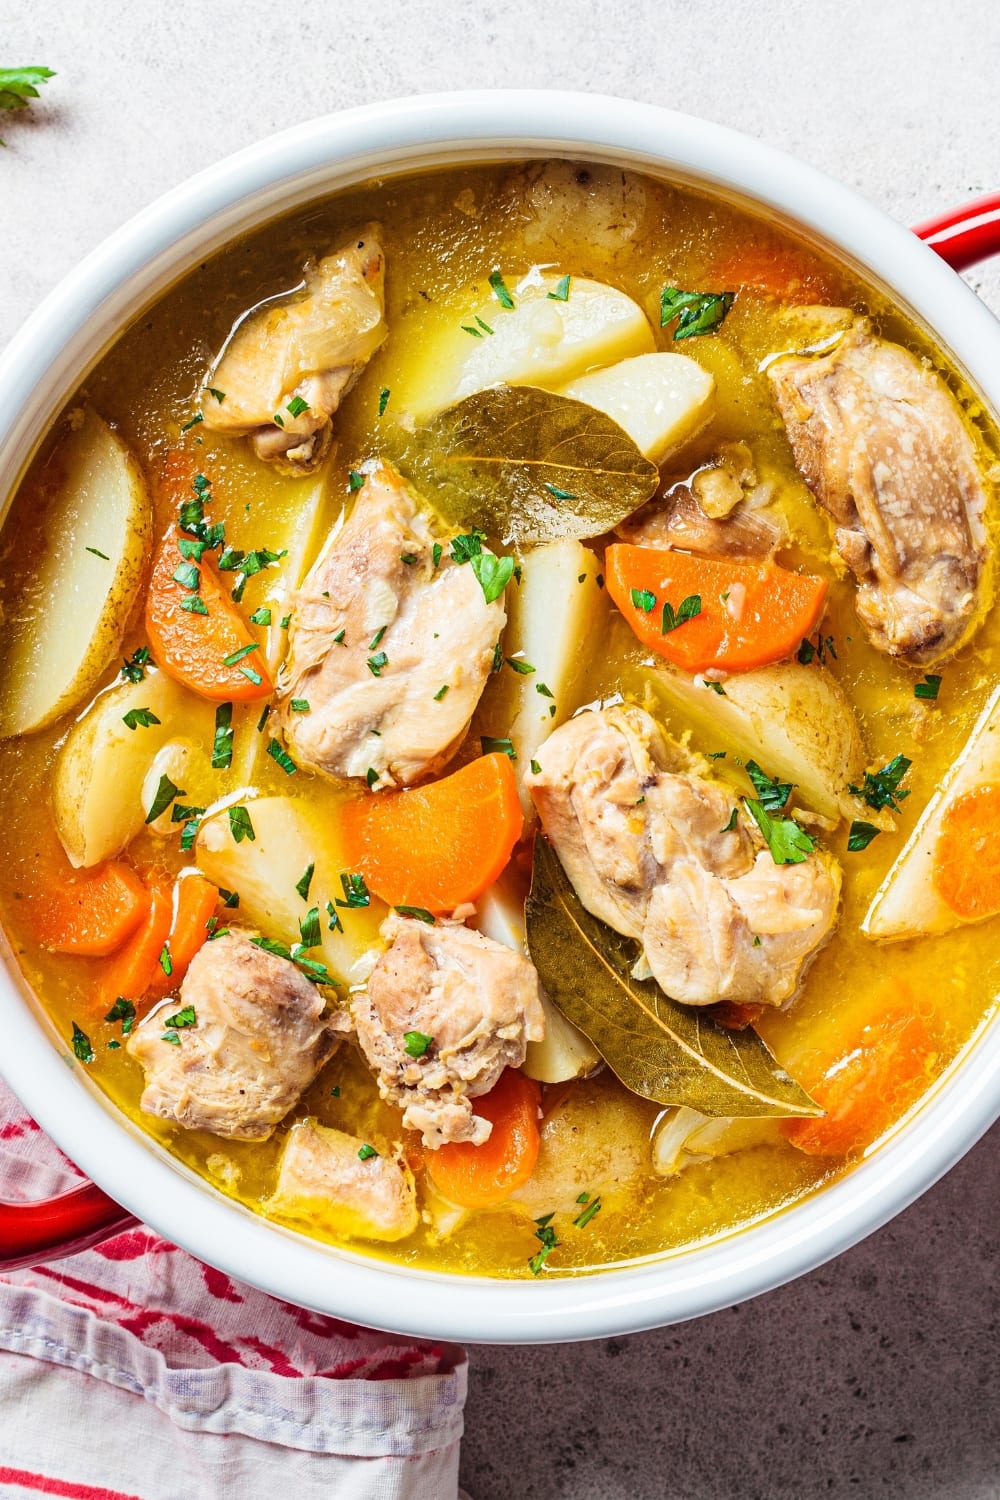 17 Recipes with Turkey Broth (Soups and More) - Insanely Good